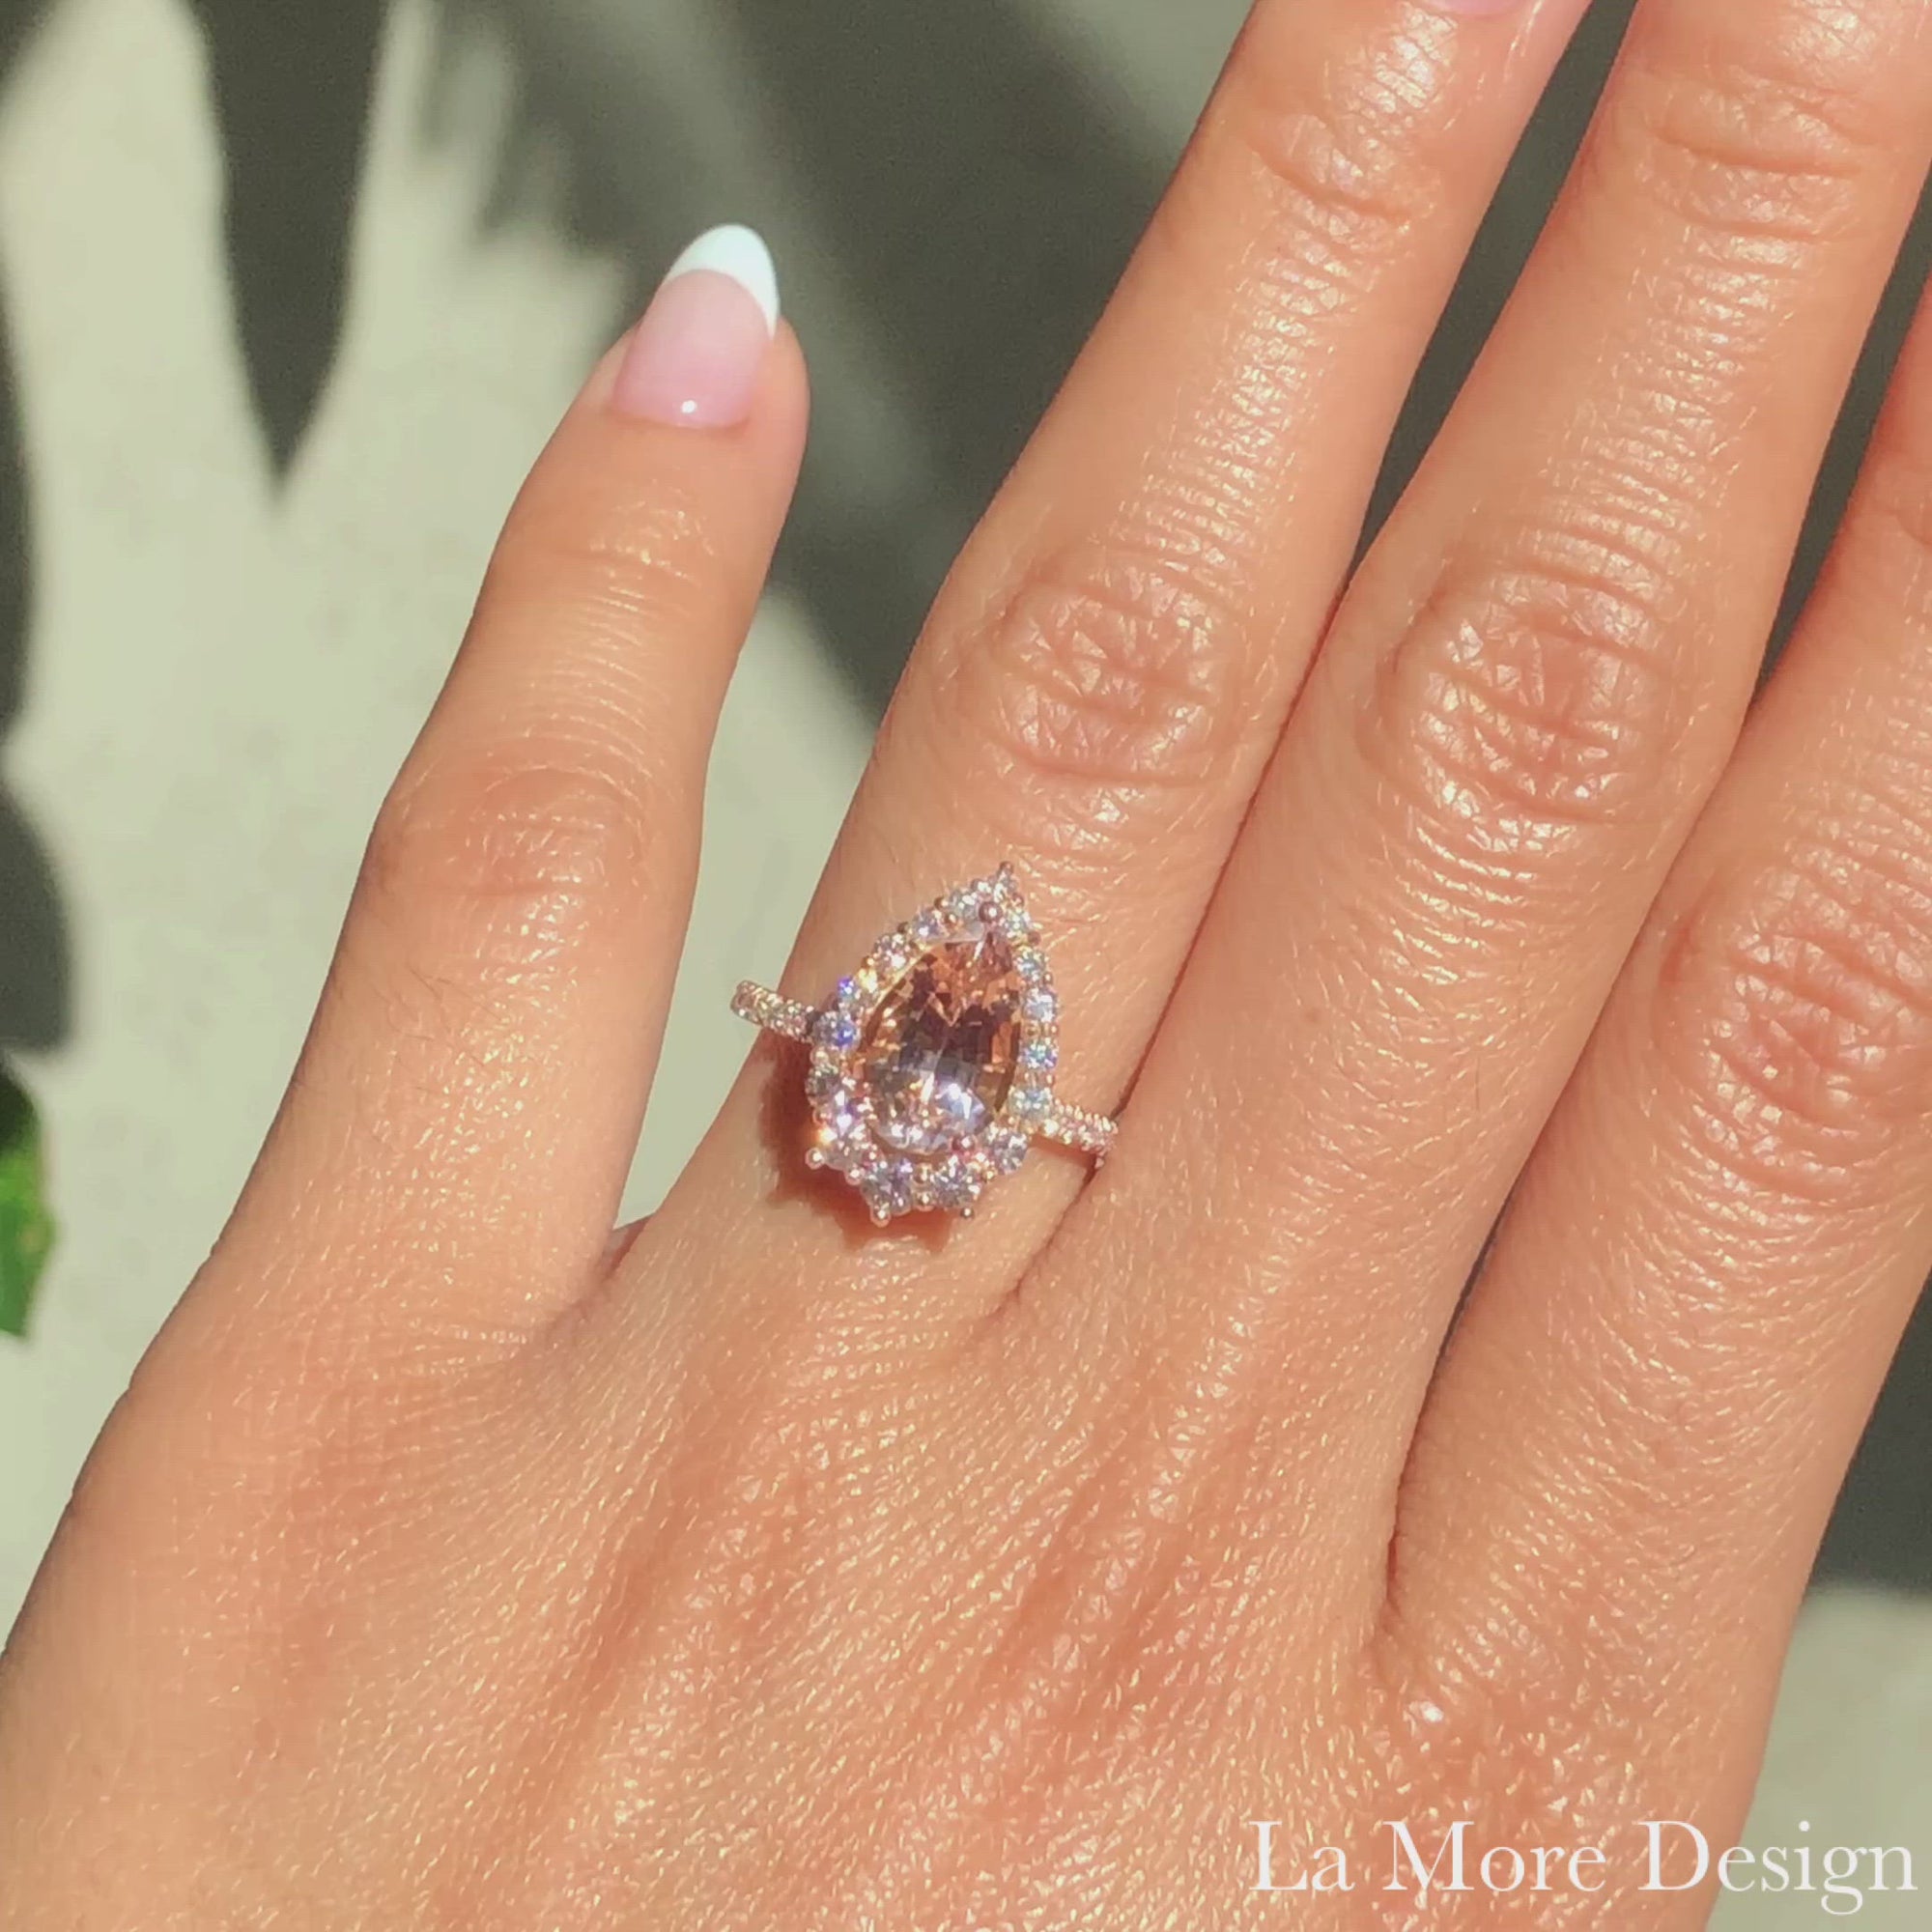 Breathtakingly unique and stunning! This morganite engagement ring is crafted in 14k rose gold Tiara Halo Diamond ring setting with a large 2.21-carat pear cut natural peach morganite center ~ total gemstone and diamond weight of the whole ring is 2.91 ct.tw.  This one-of-a-kind pear-cut engagement ring is perfect for brides looking for diamond alternative engagement rings! All our wedding bands can pair beautifully with this gorgeous halo diamond morganite ring!